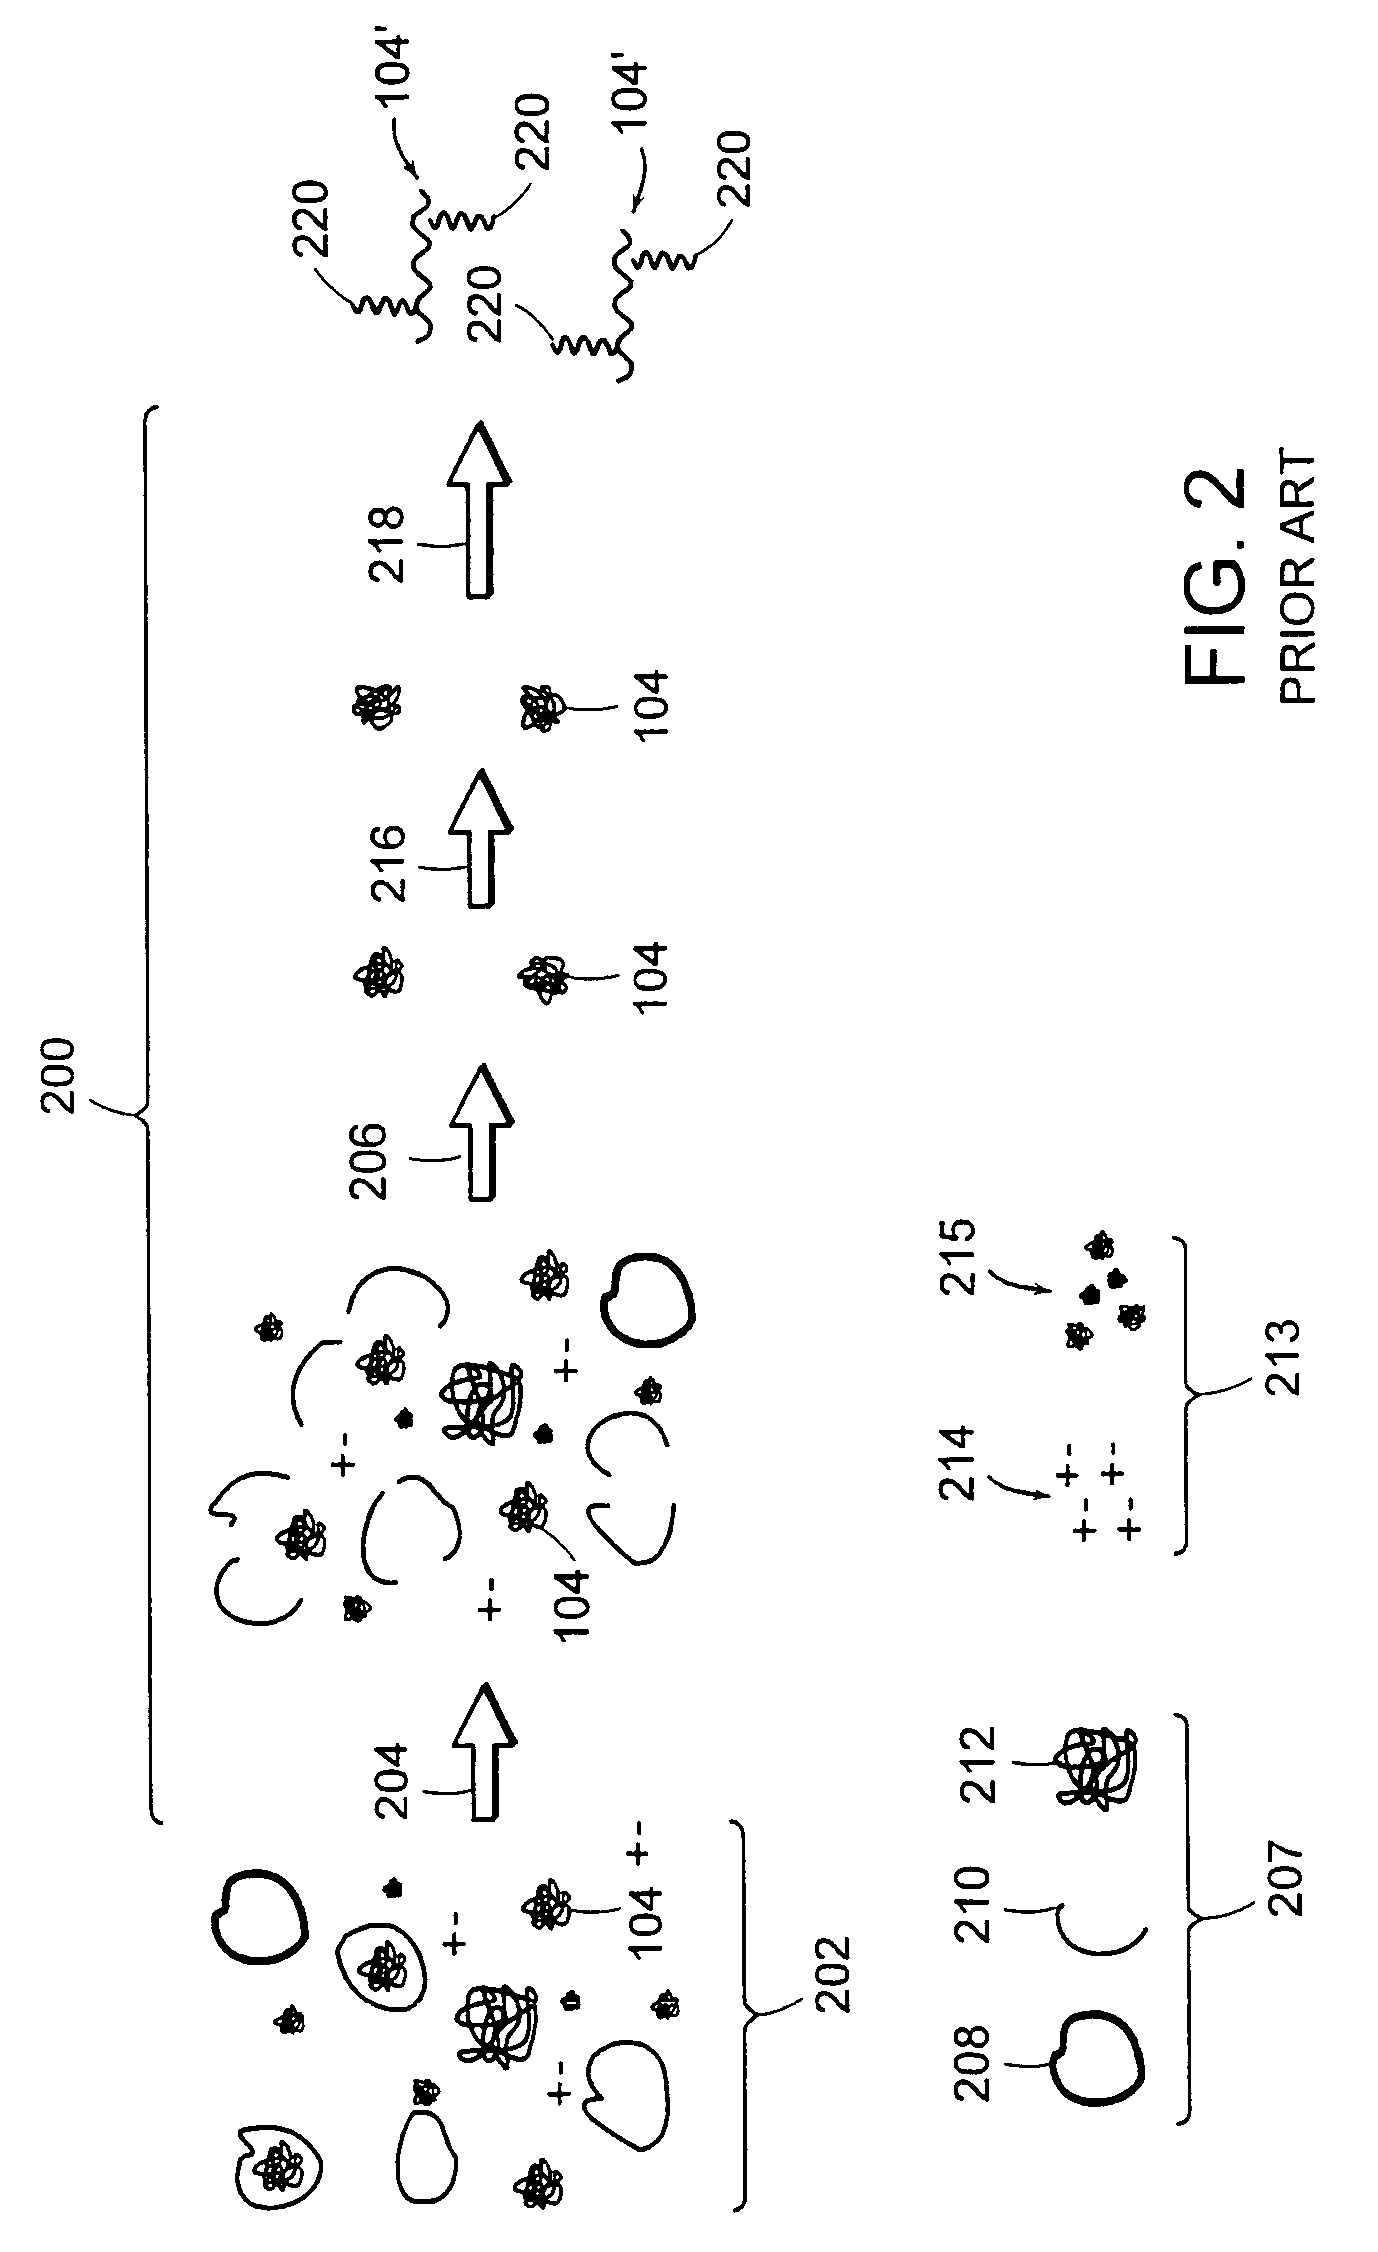 Fluid interface for bioprocessor systems